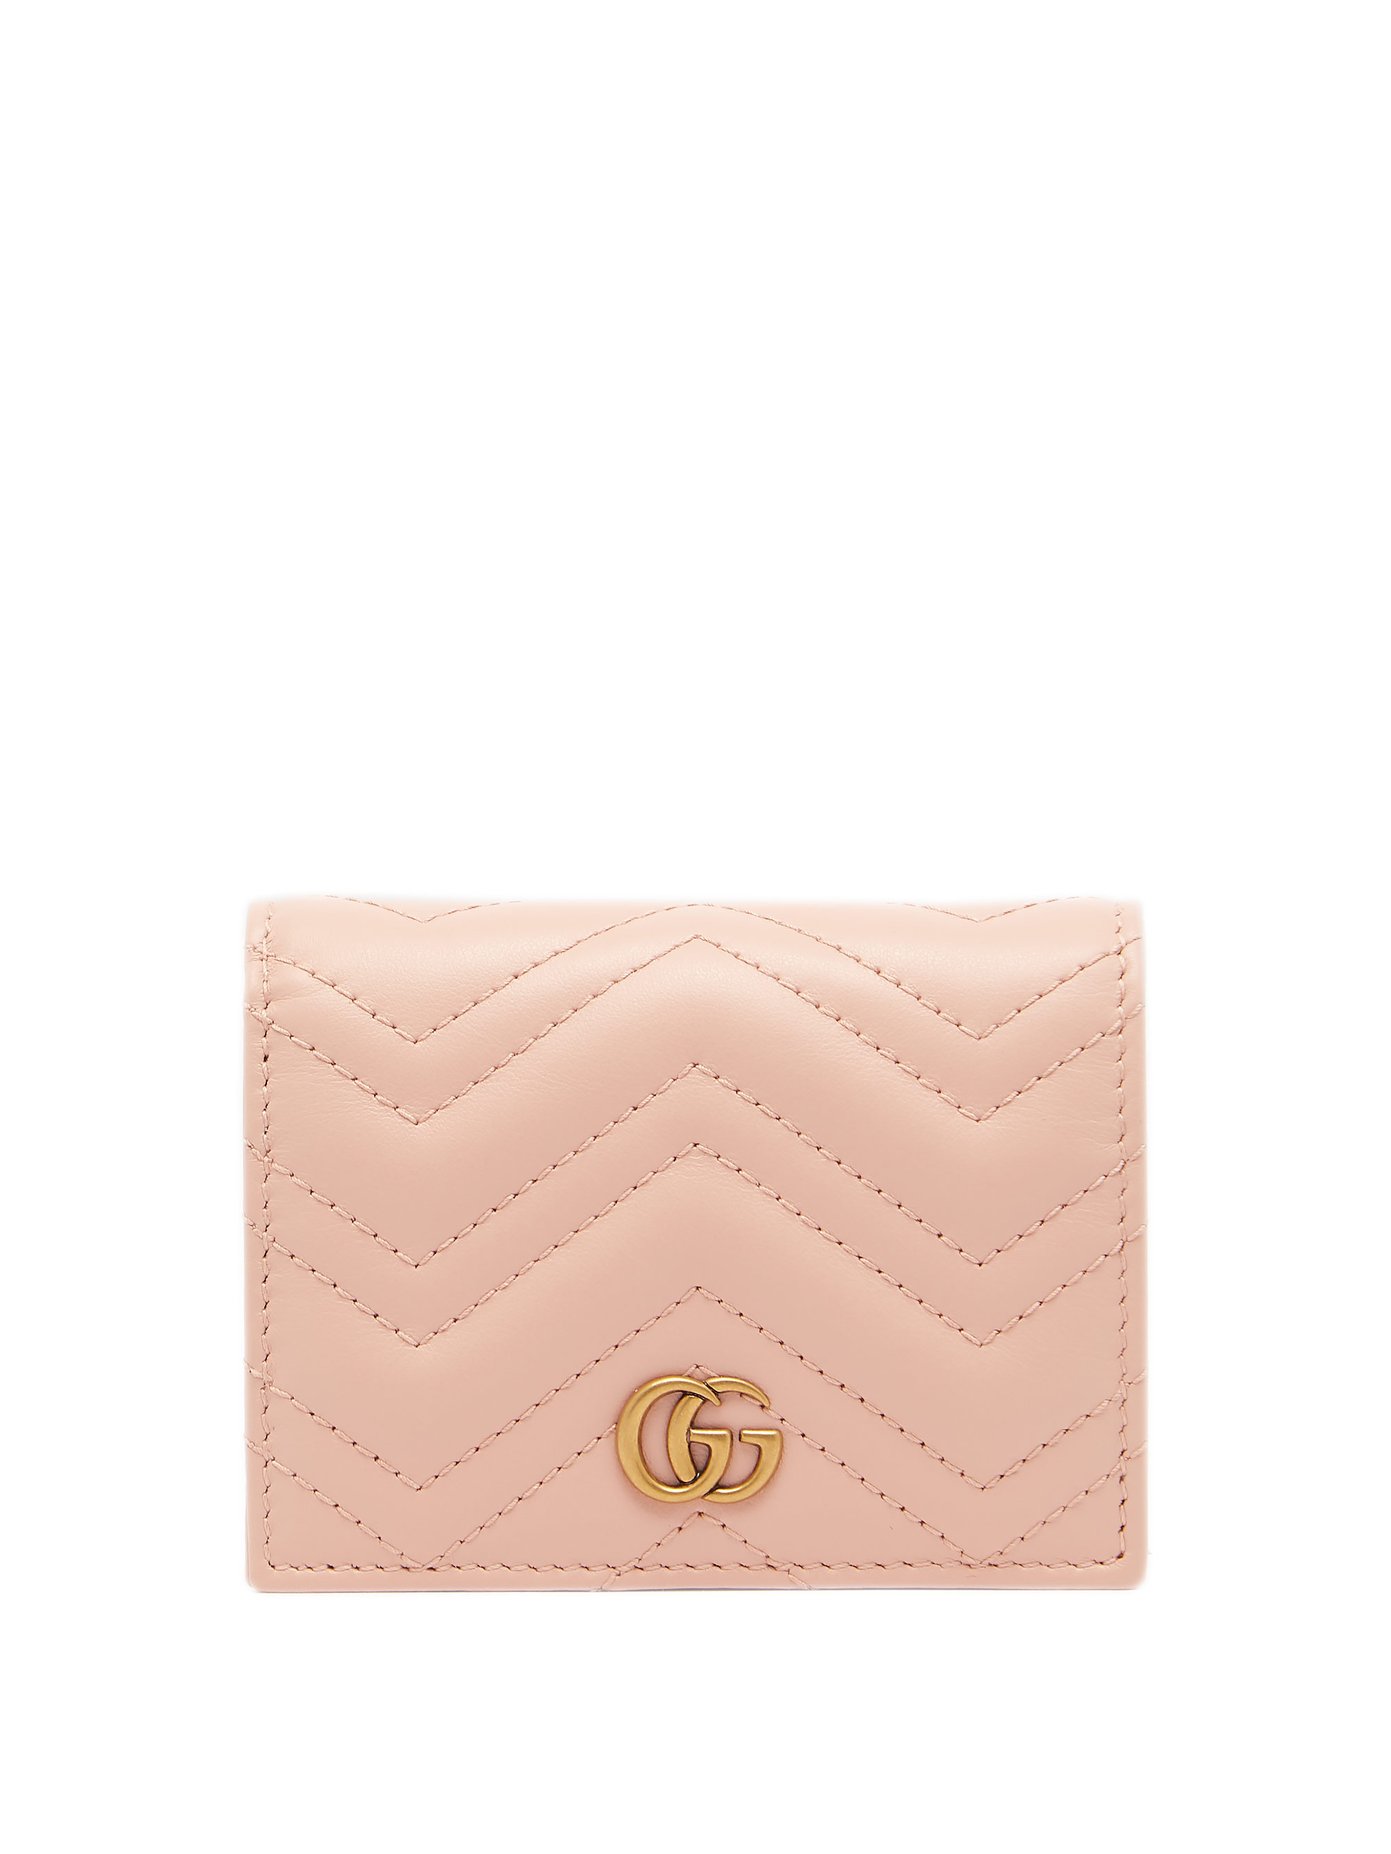 gucci marmont bifold wallet